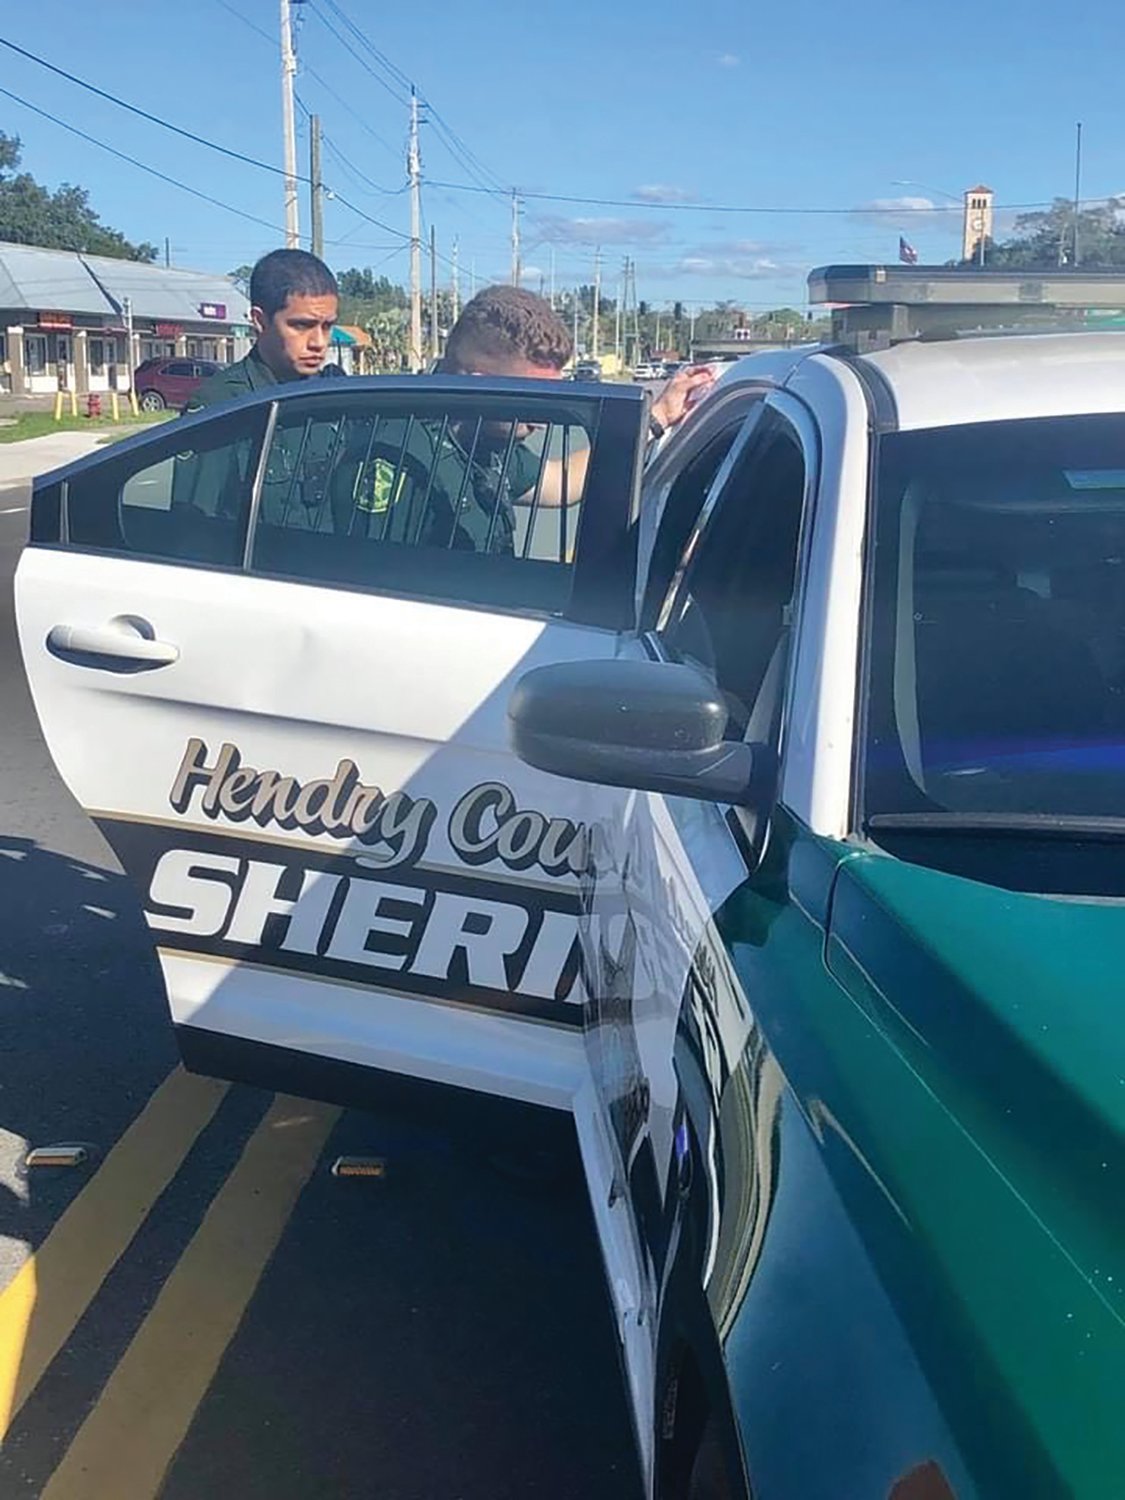 HCSO deputies eventually stop and apprehend this driver, after he sped up and ran through a red light.